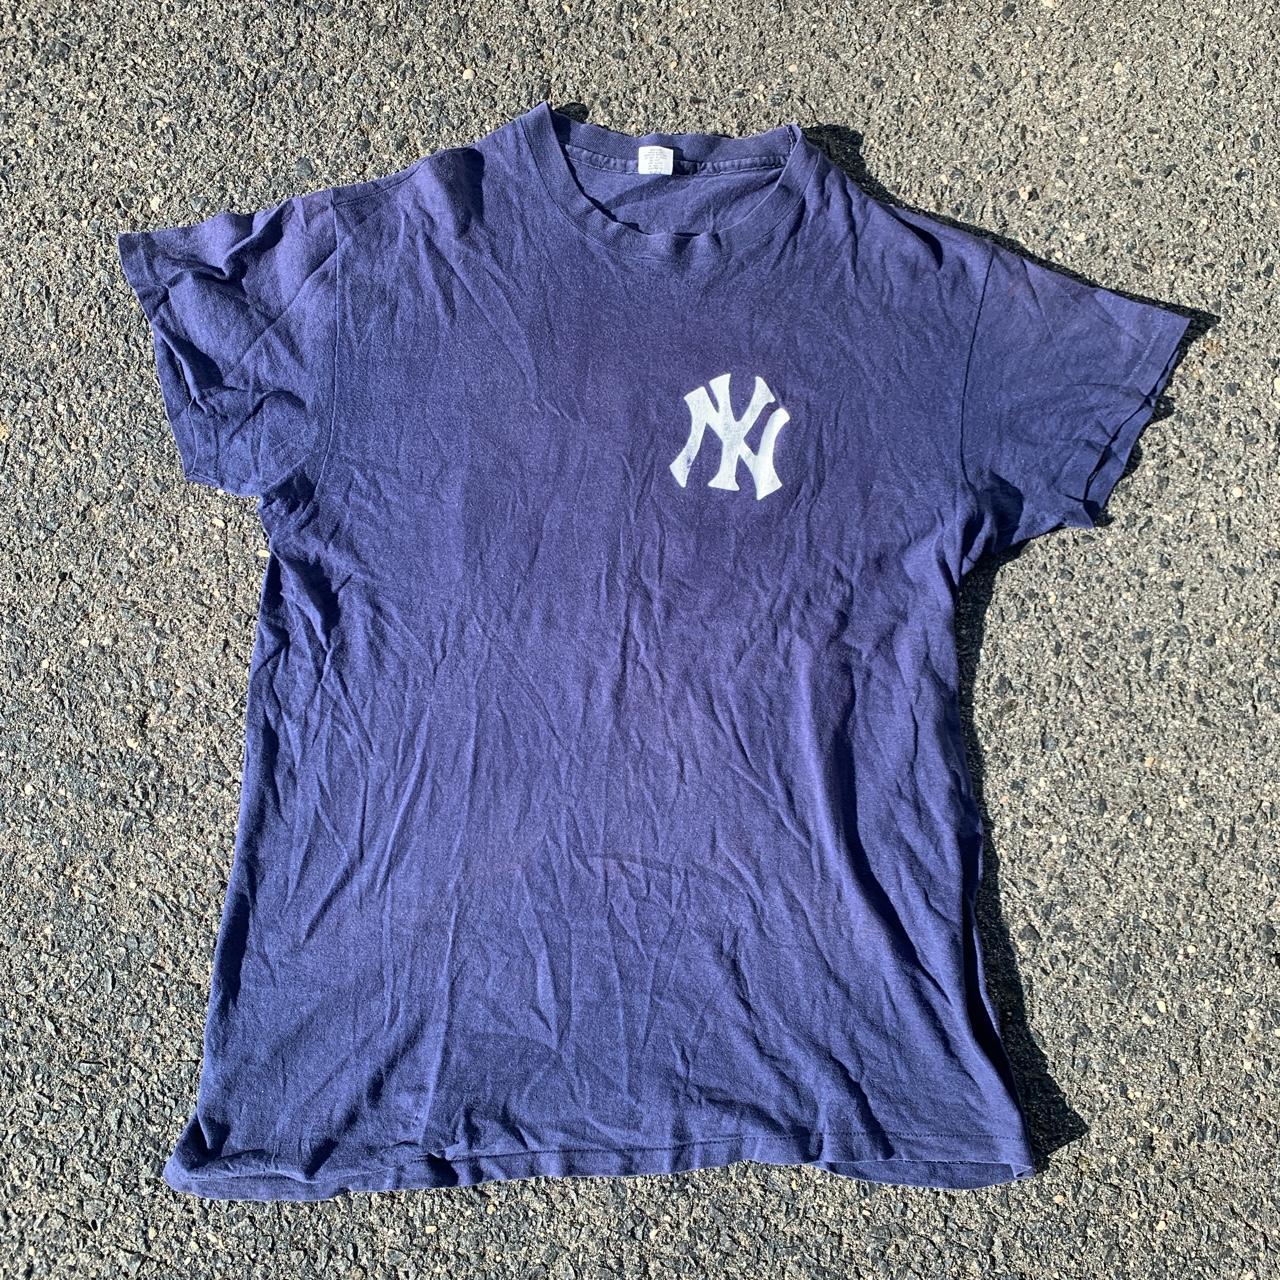 Vintage 1970s Ron Guidry NY Yankees tee size XL ⚾️ 2